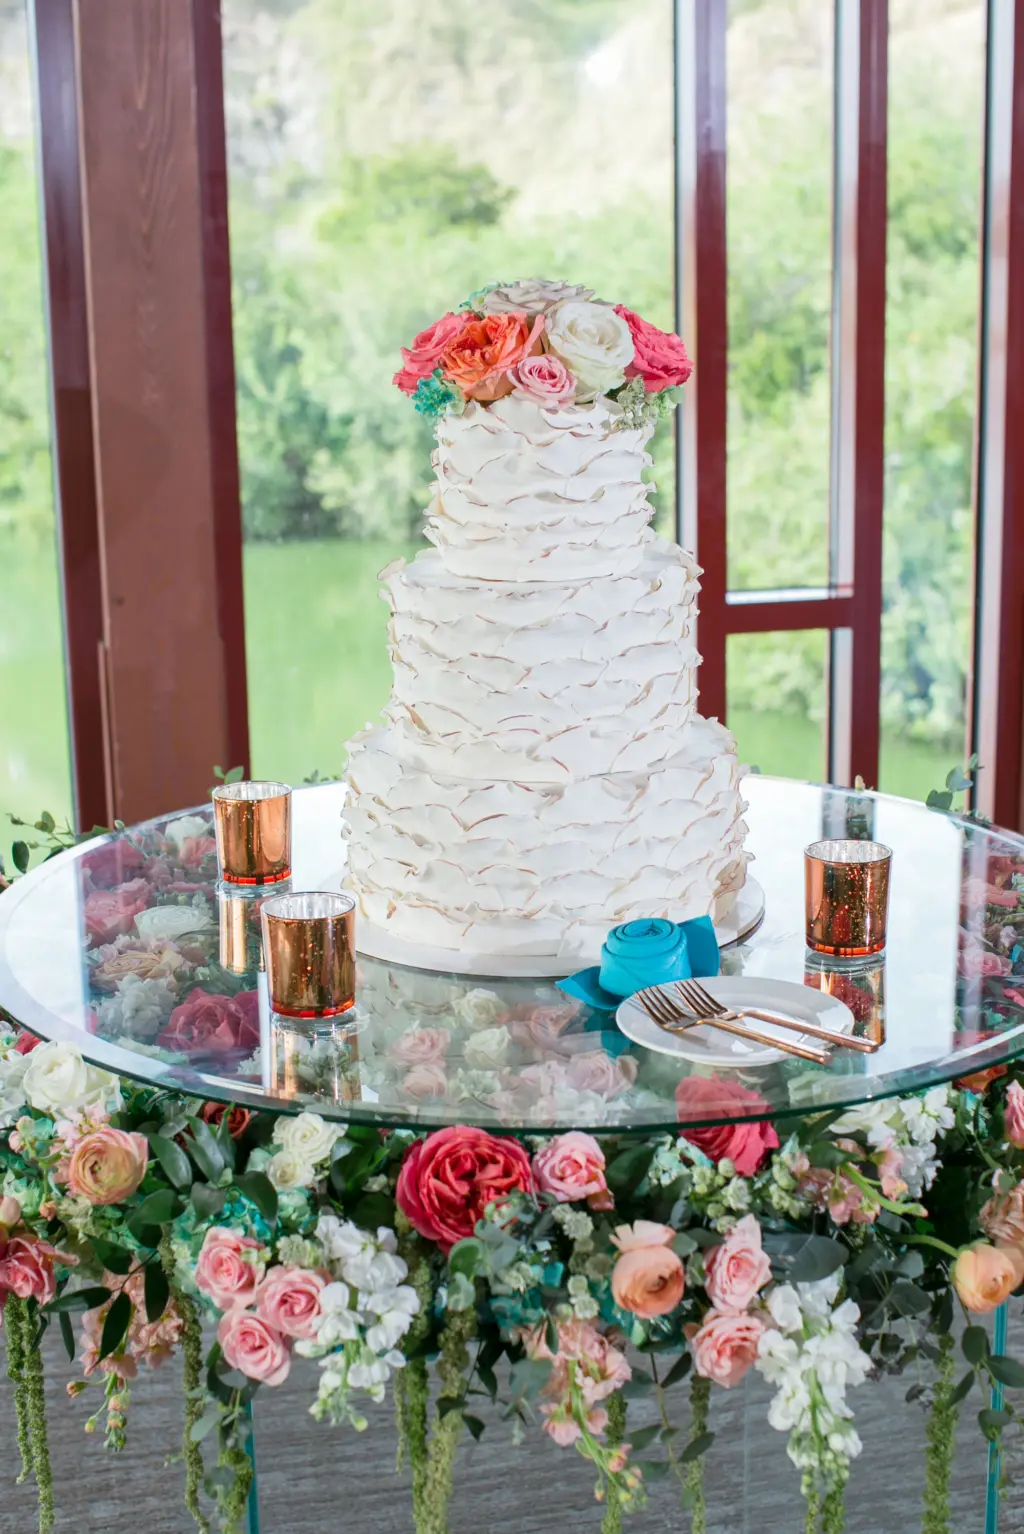 Three Tier White Wedding Cake with Colorful Summer Inspired Florals in Coral, Pink and Turquoise | Florals Tampa Monarch Events and Designs